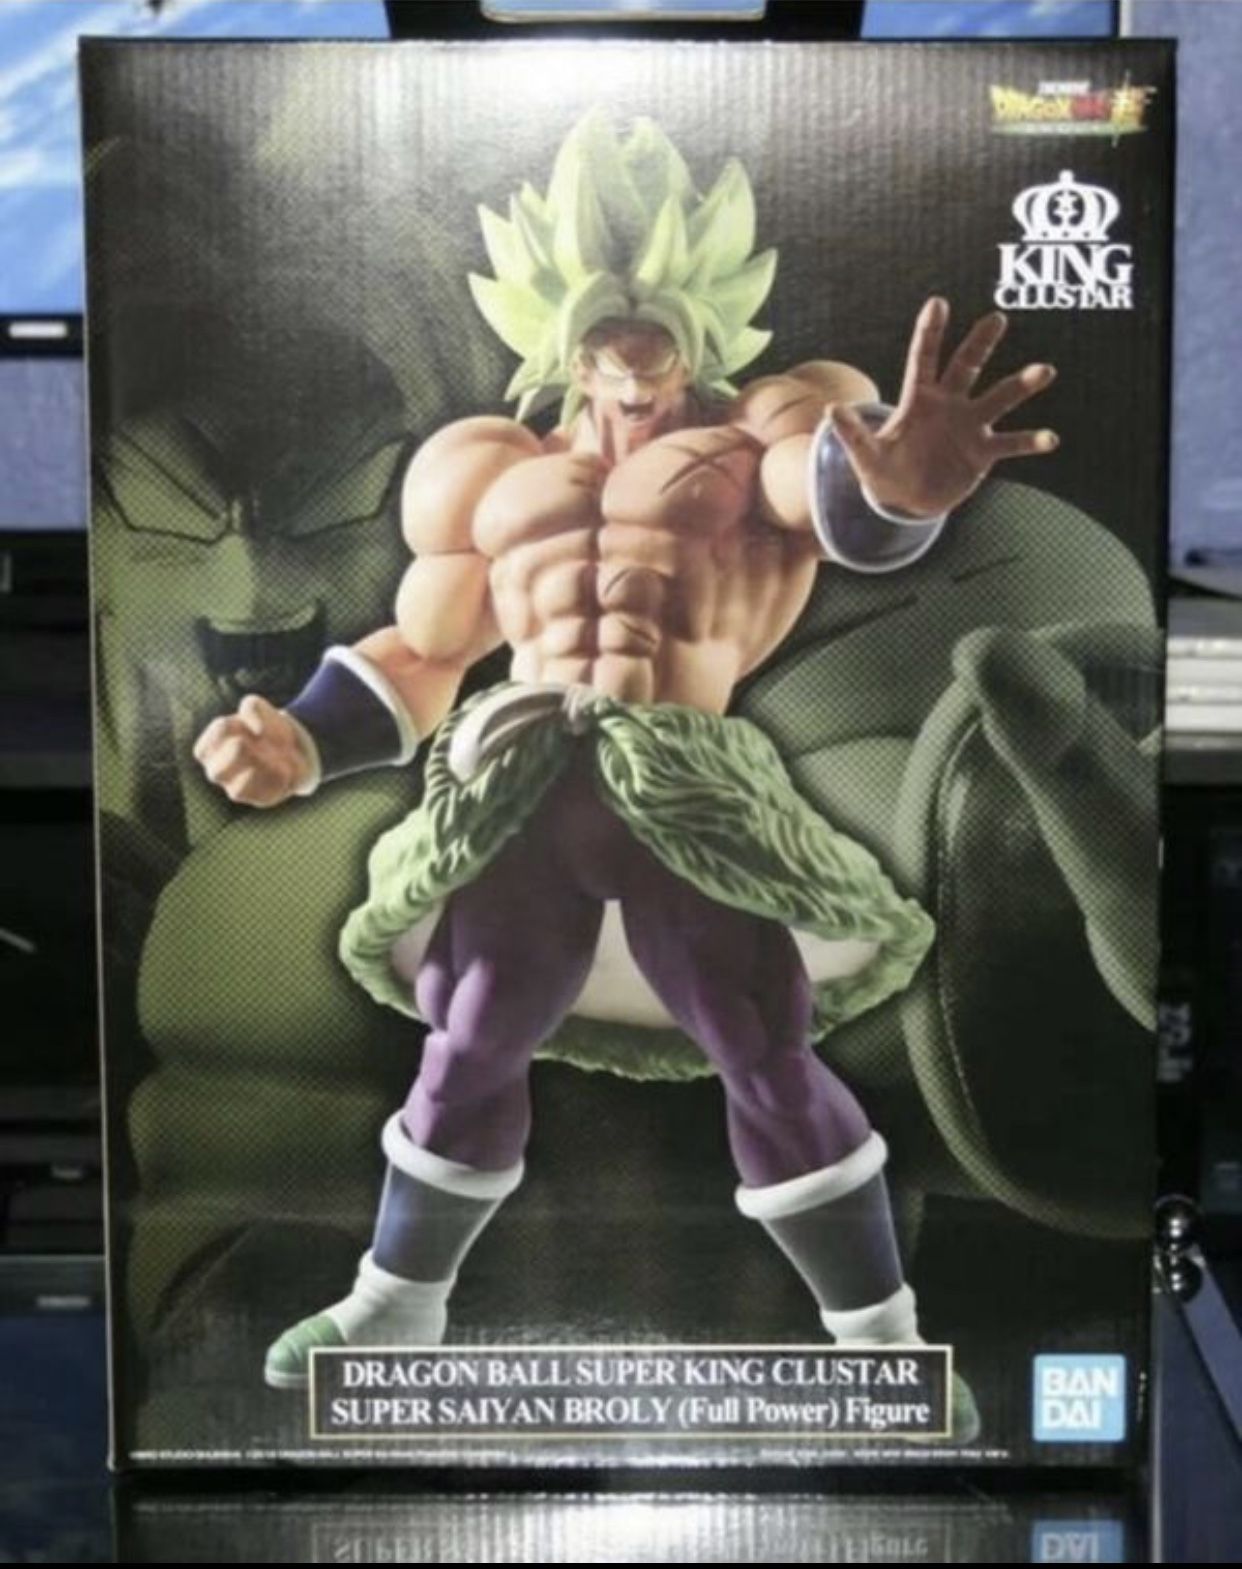 Dragon ball z super king cluster broly new